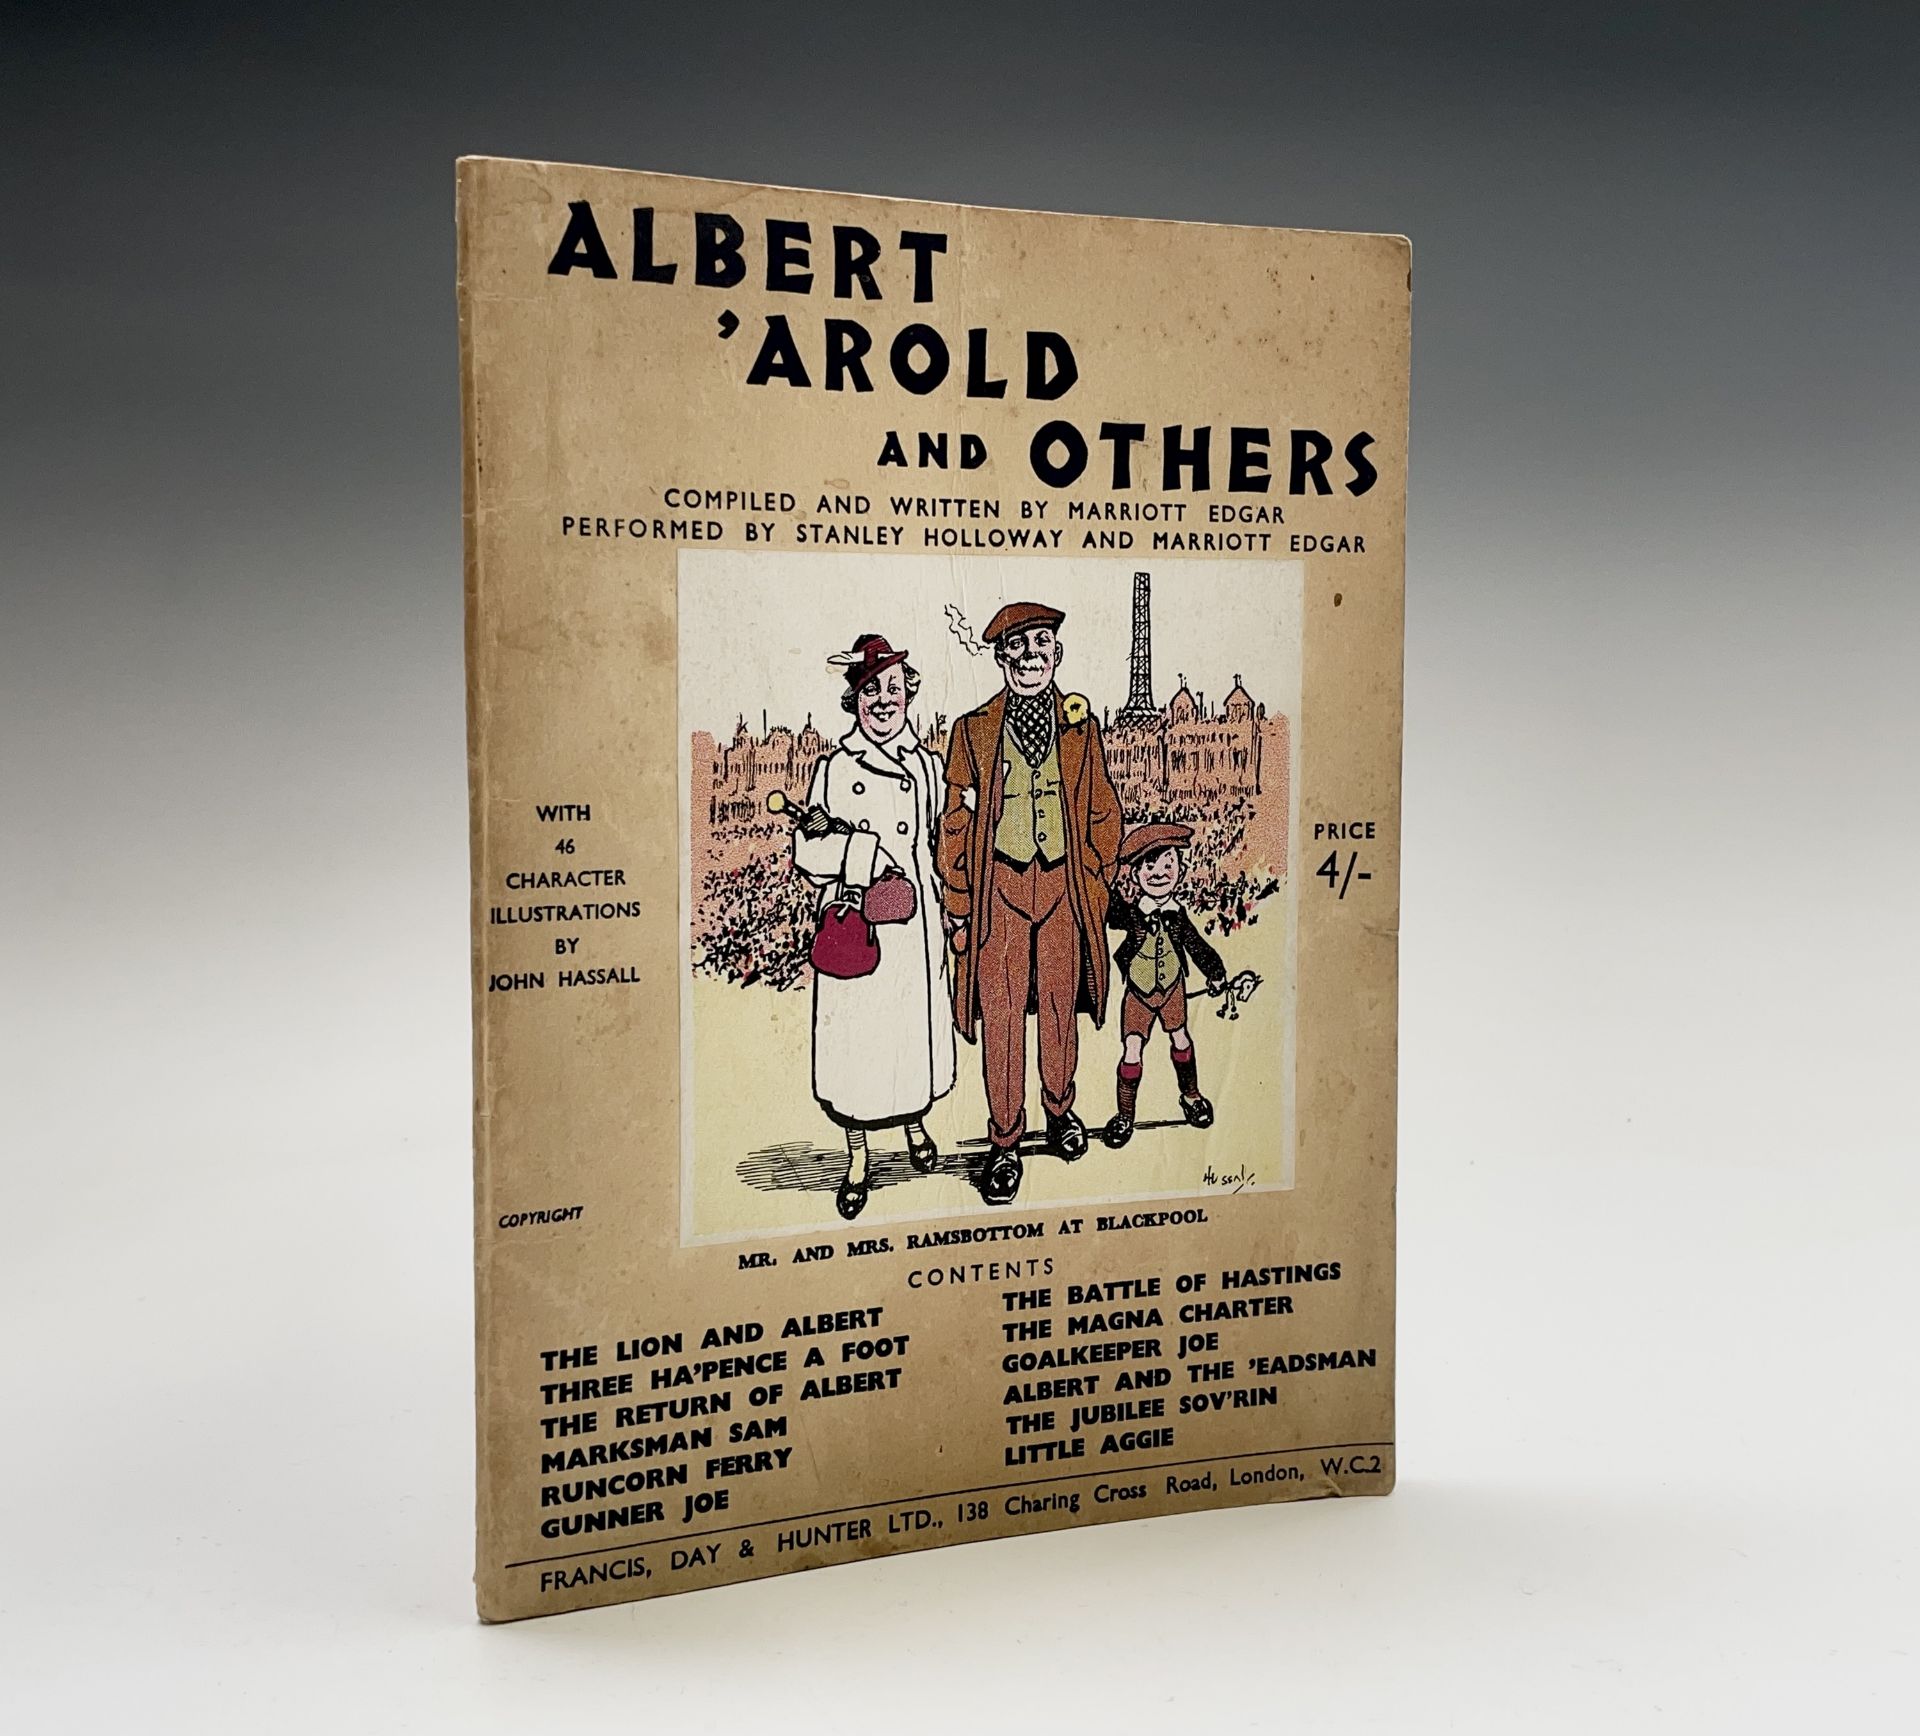 MARRIOTT EDGAR. 'Albert Arold and Others compiled and written by Marriott Edgar. Performed by